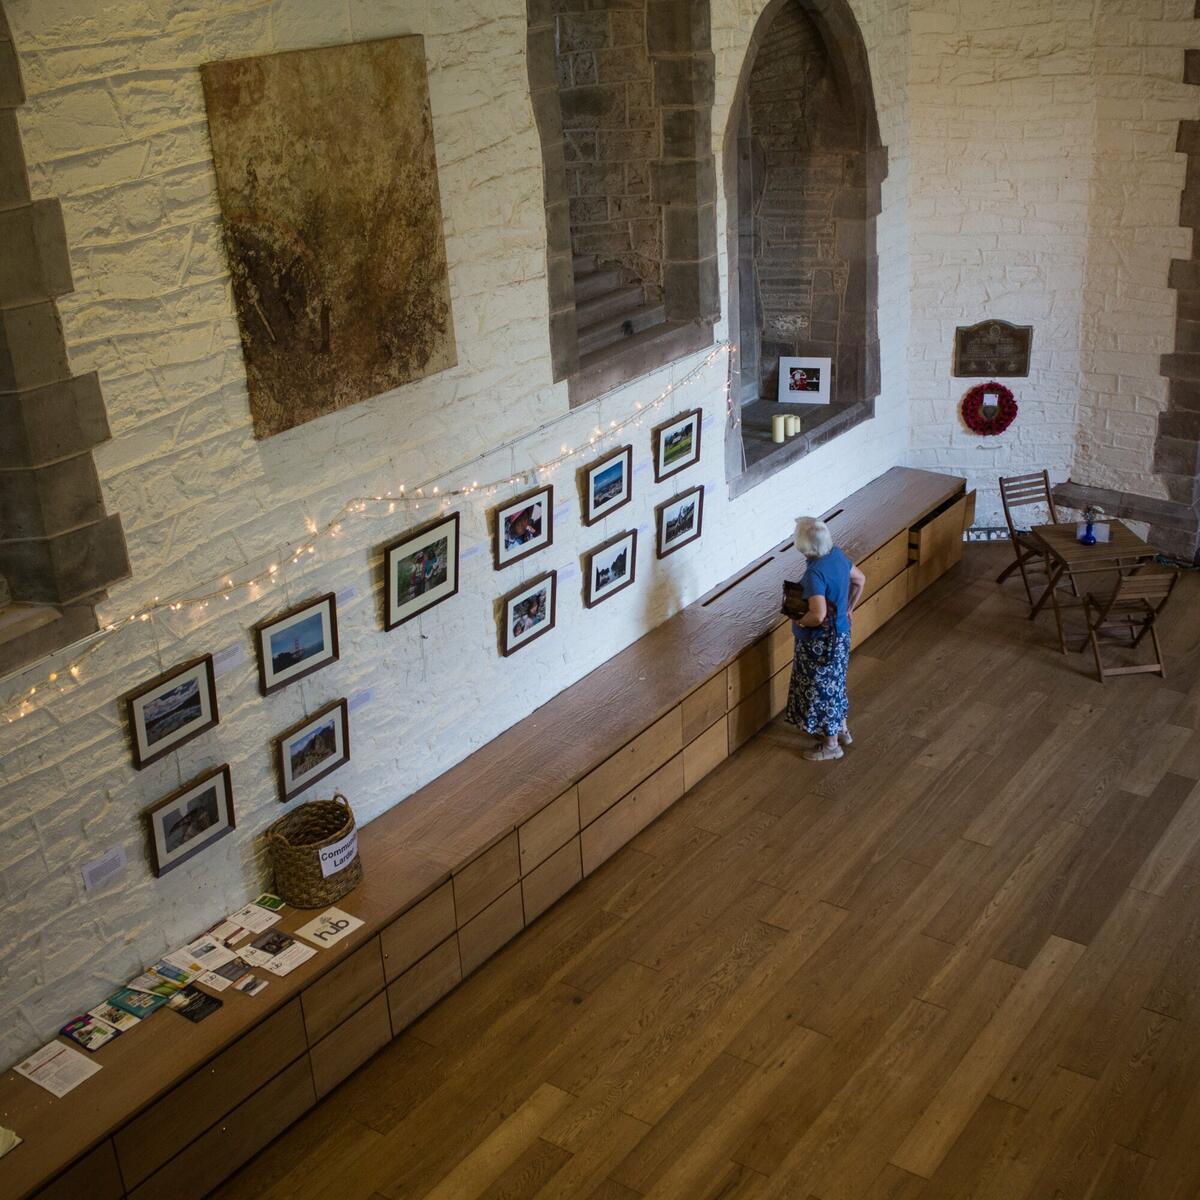 St Peter's houses an exhibition space within the working church.